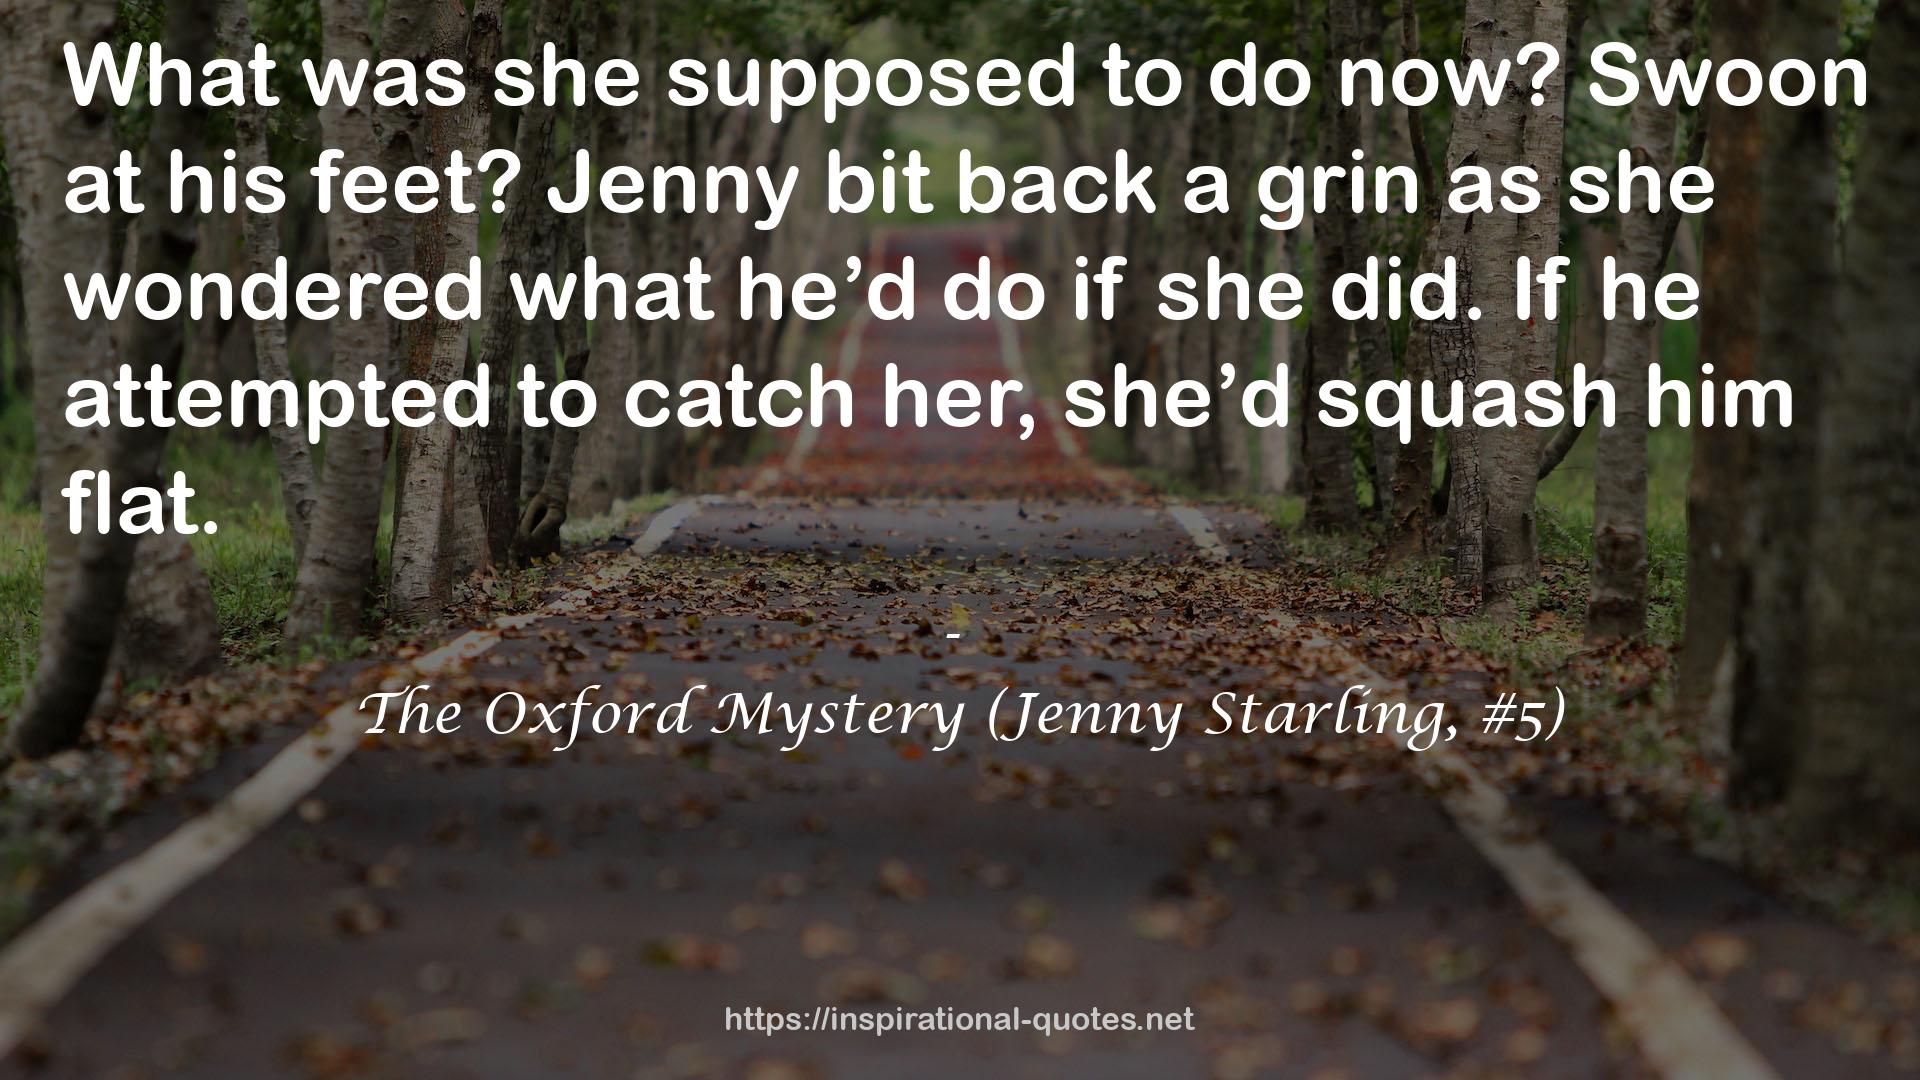 The Oxford Mystery (Jenny Starling, #5) QUOTES